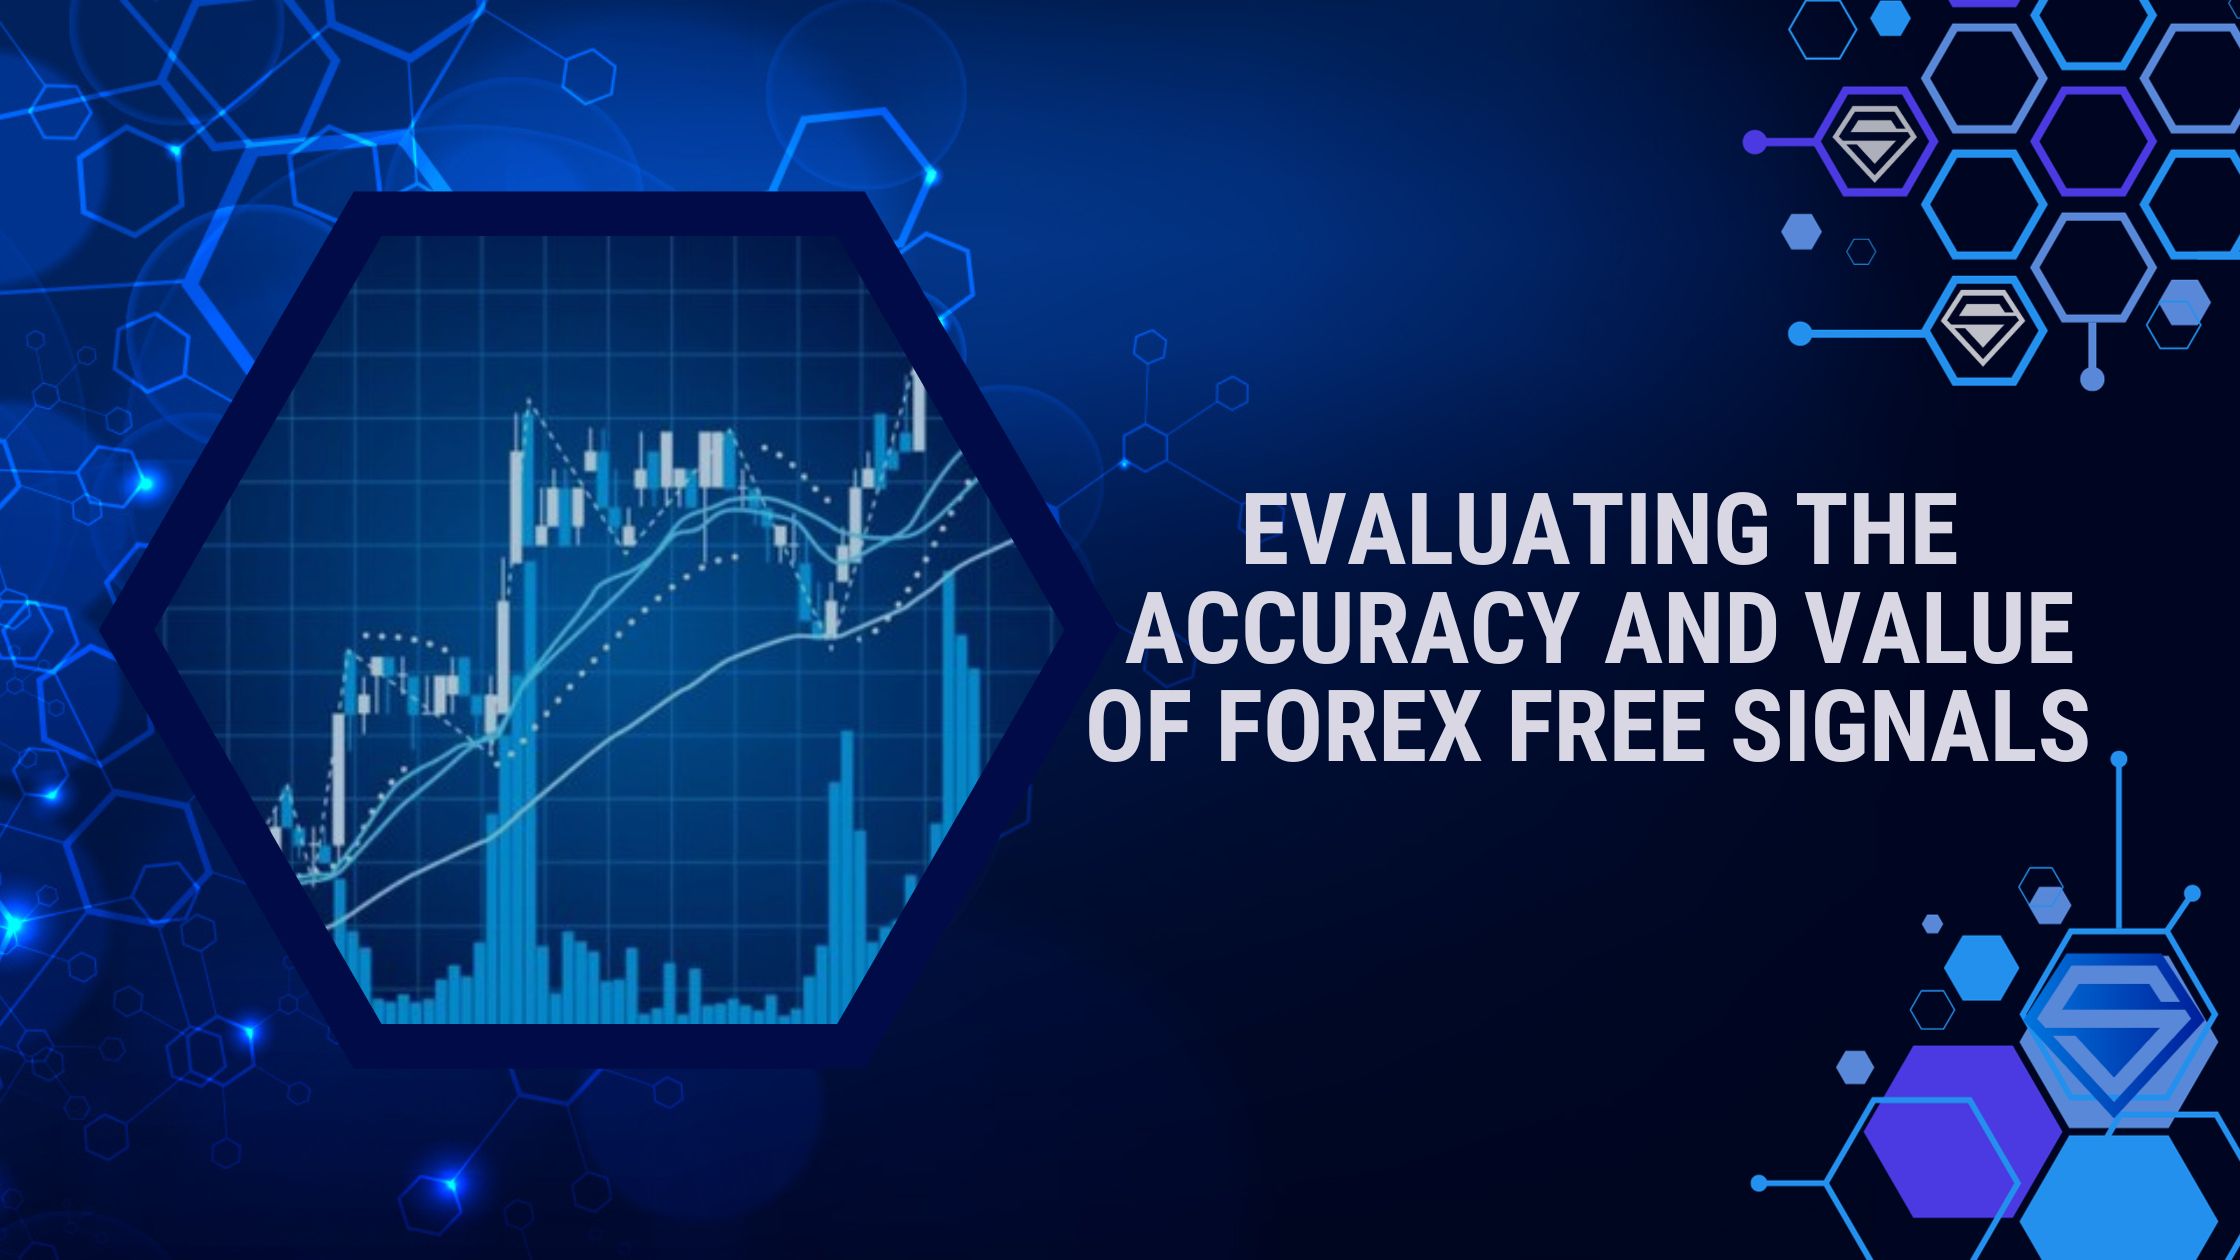 Evaluating the Accuracy and Value of Forex Free Signals